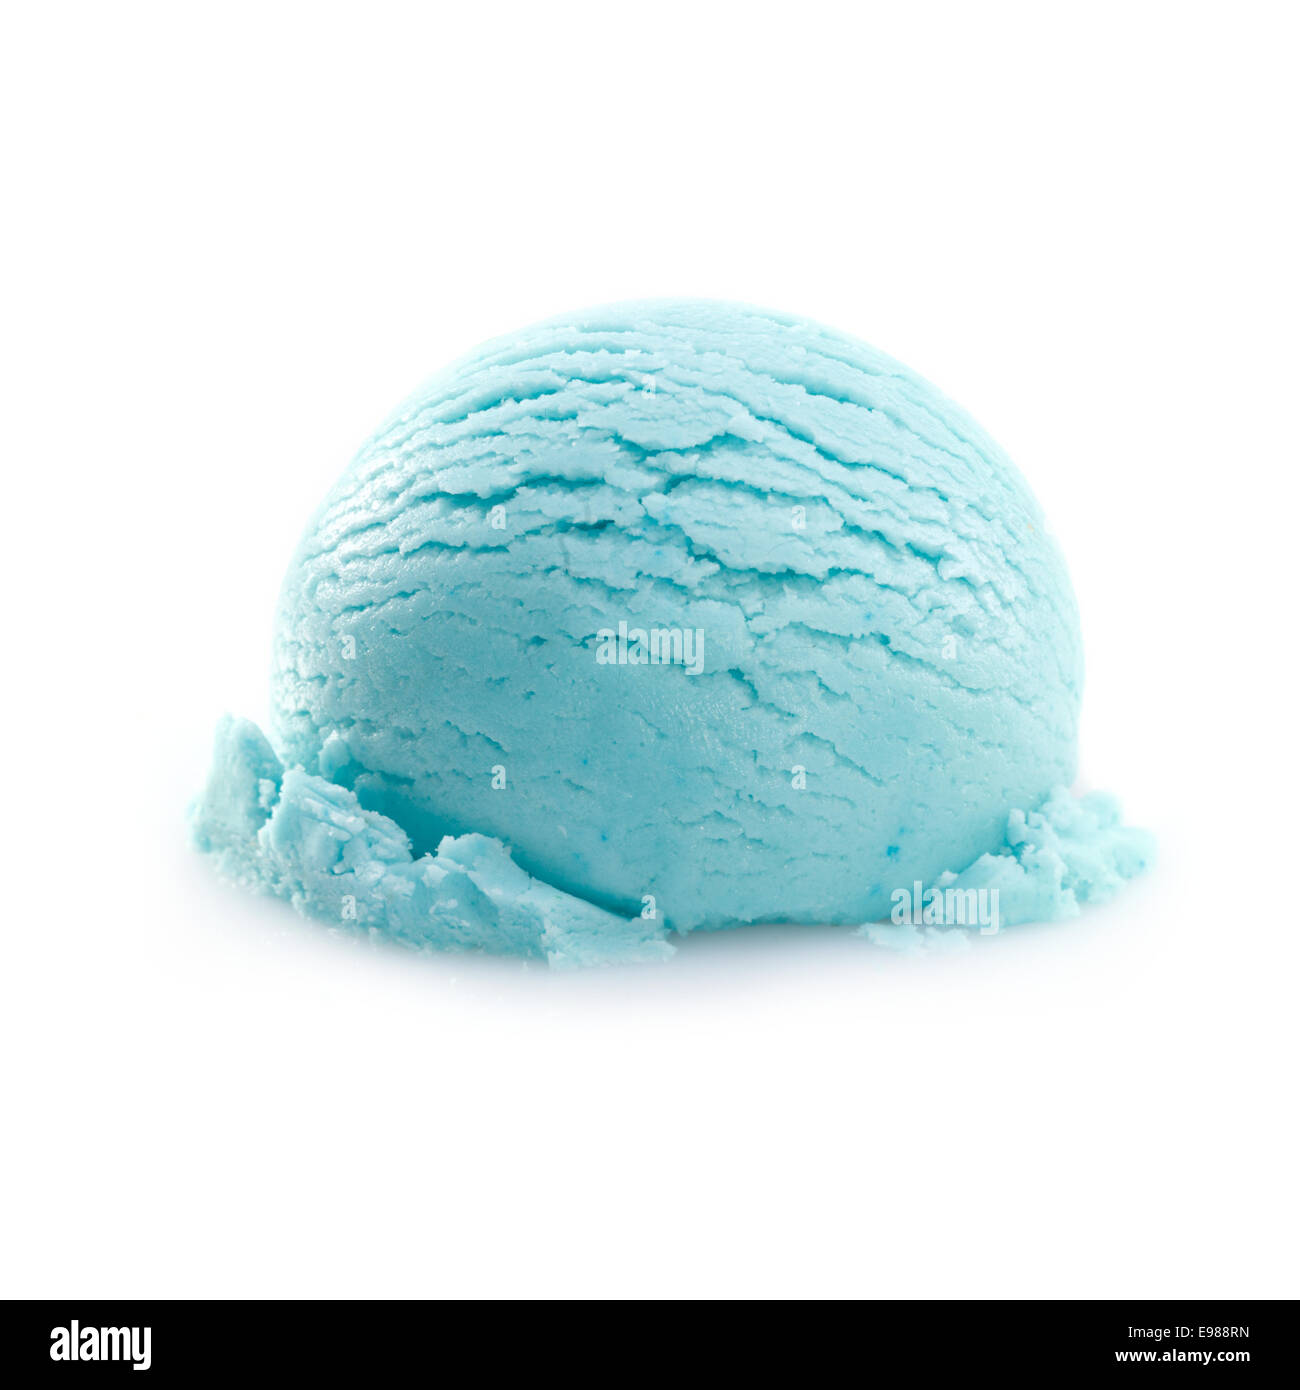 https://c8.alamy.com/comp/E988RN/isolated-scoop-of-turquoise-ice-cream-isolated-on-white-background-E988RN.jpg